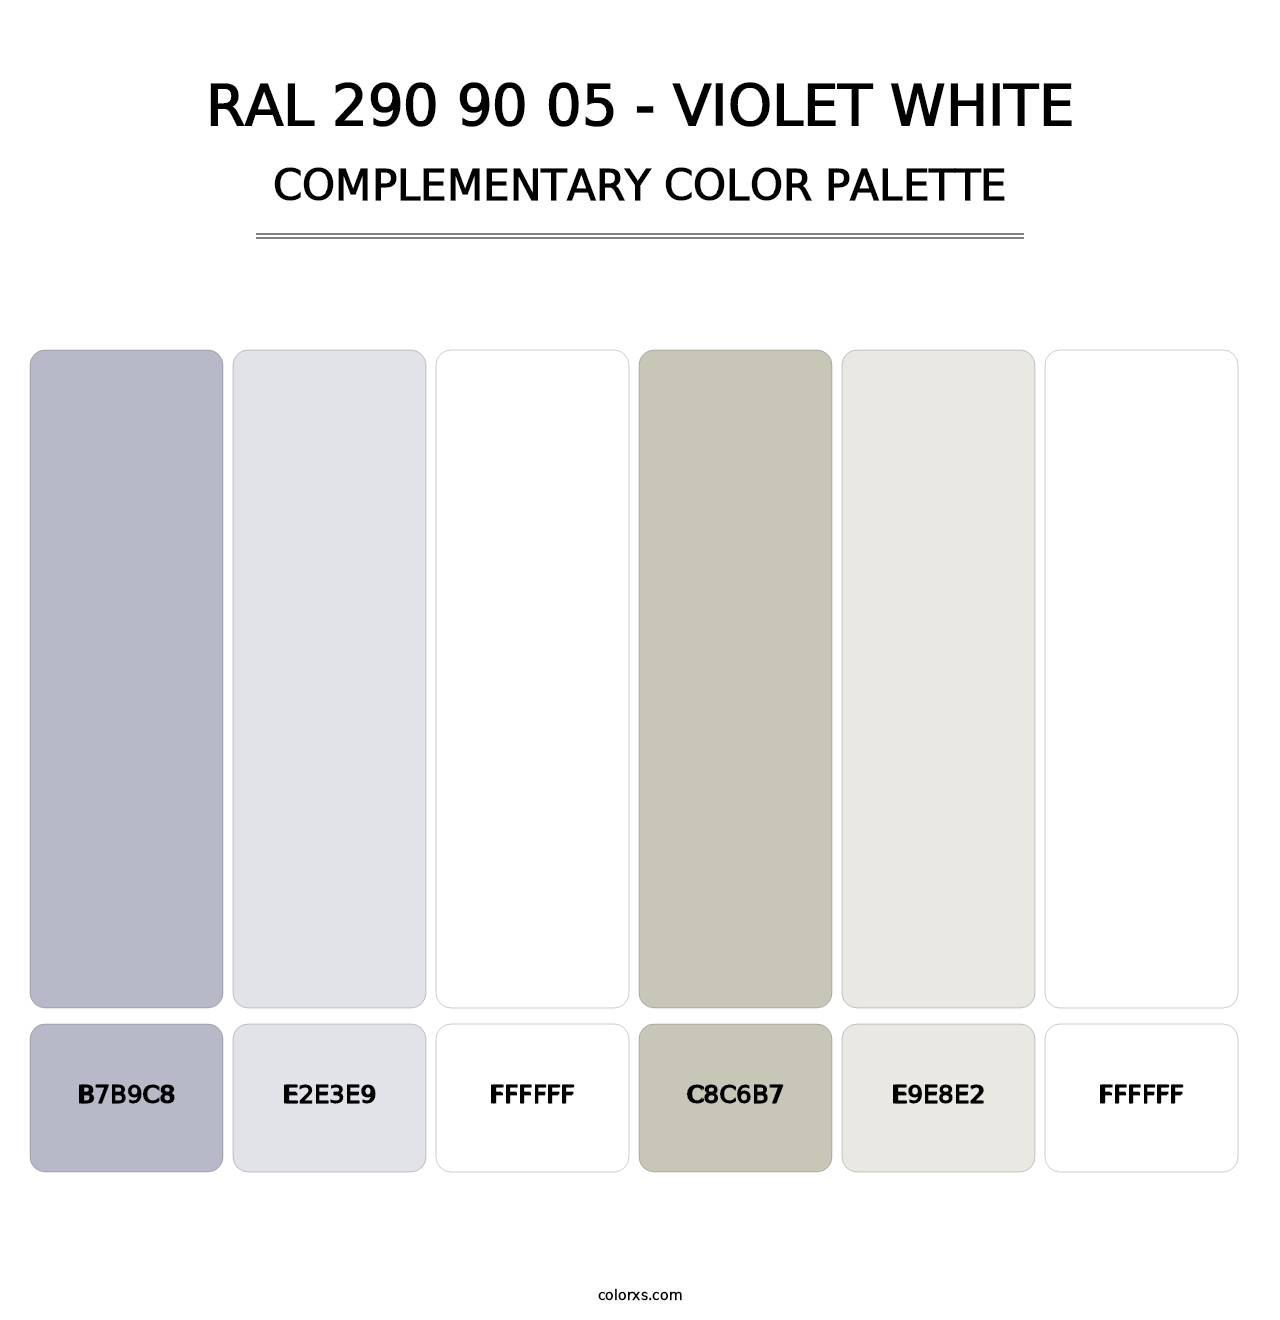 RAL 290 90 05 - Violet White - Complementary Color Palette